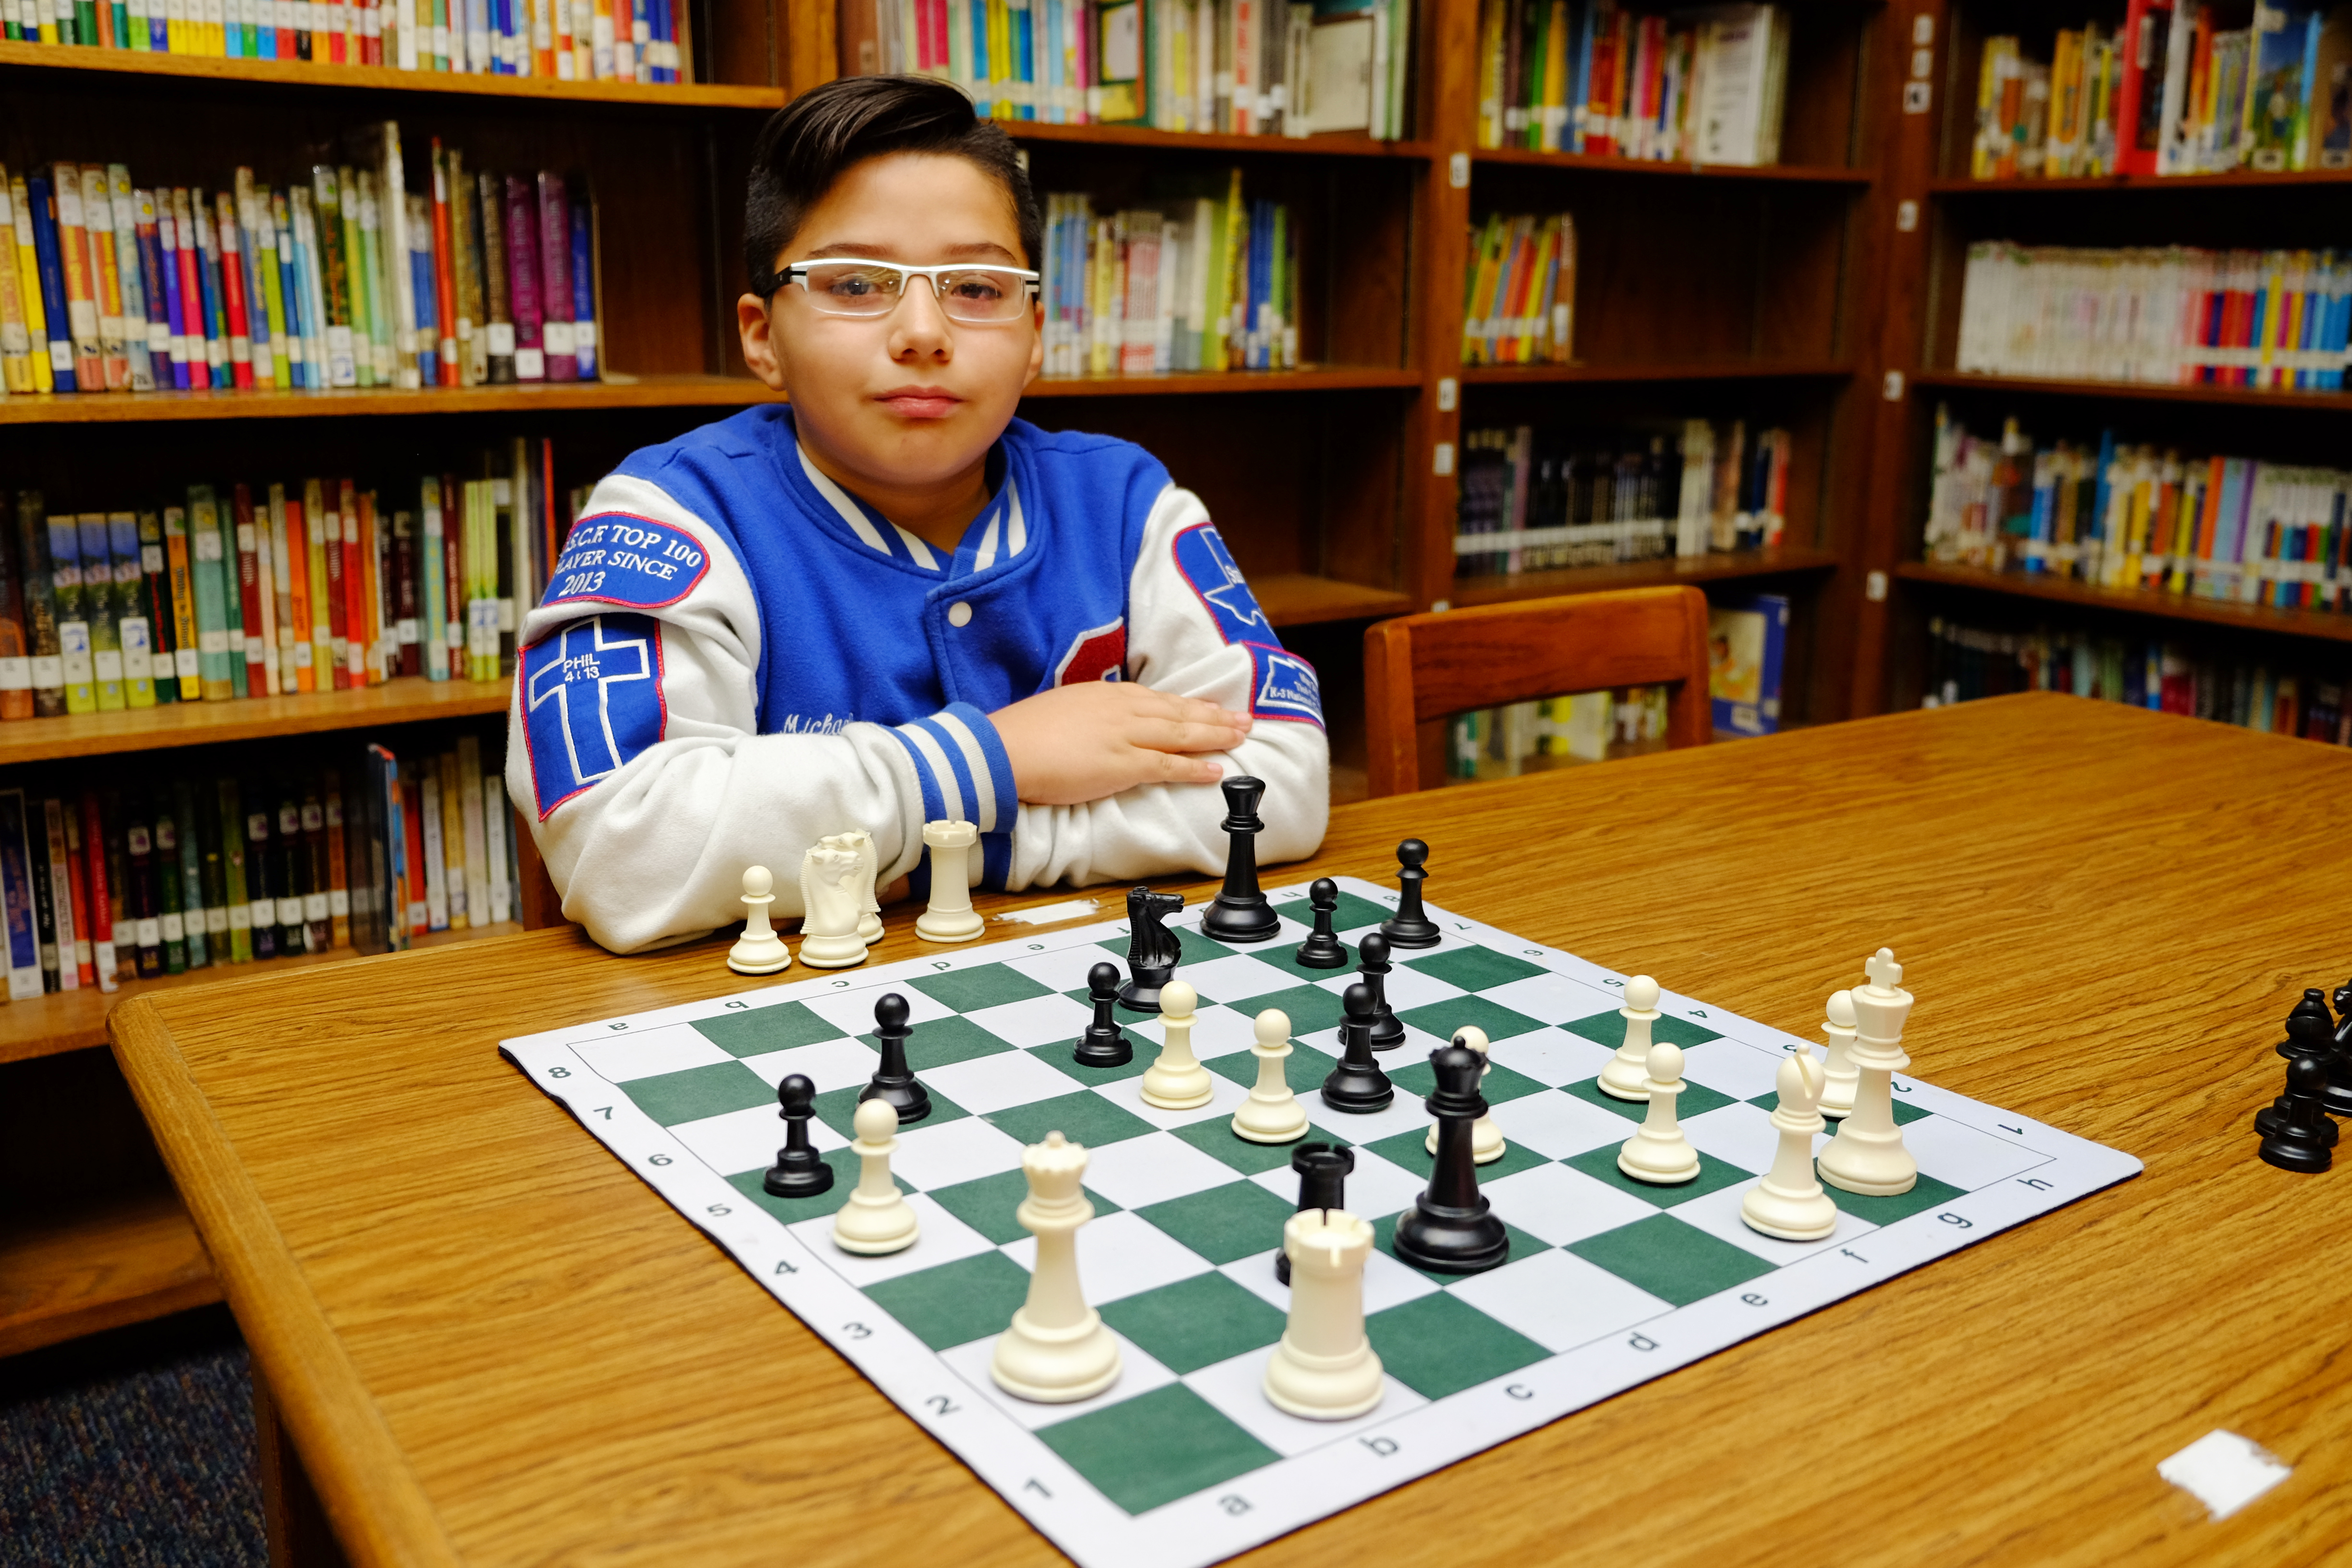 Houston Elementary student named Co-Champion at state chess tournament